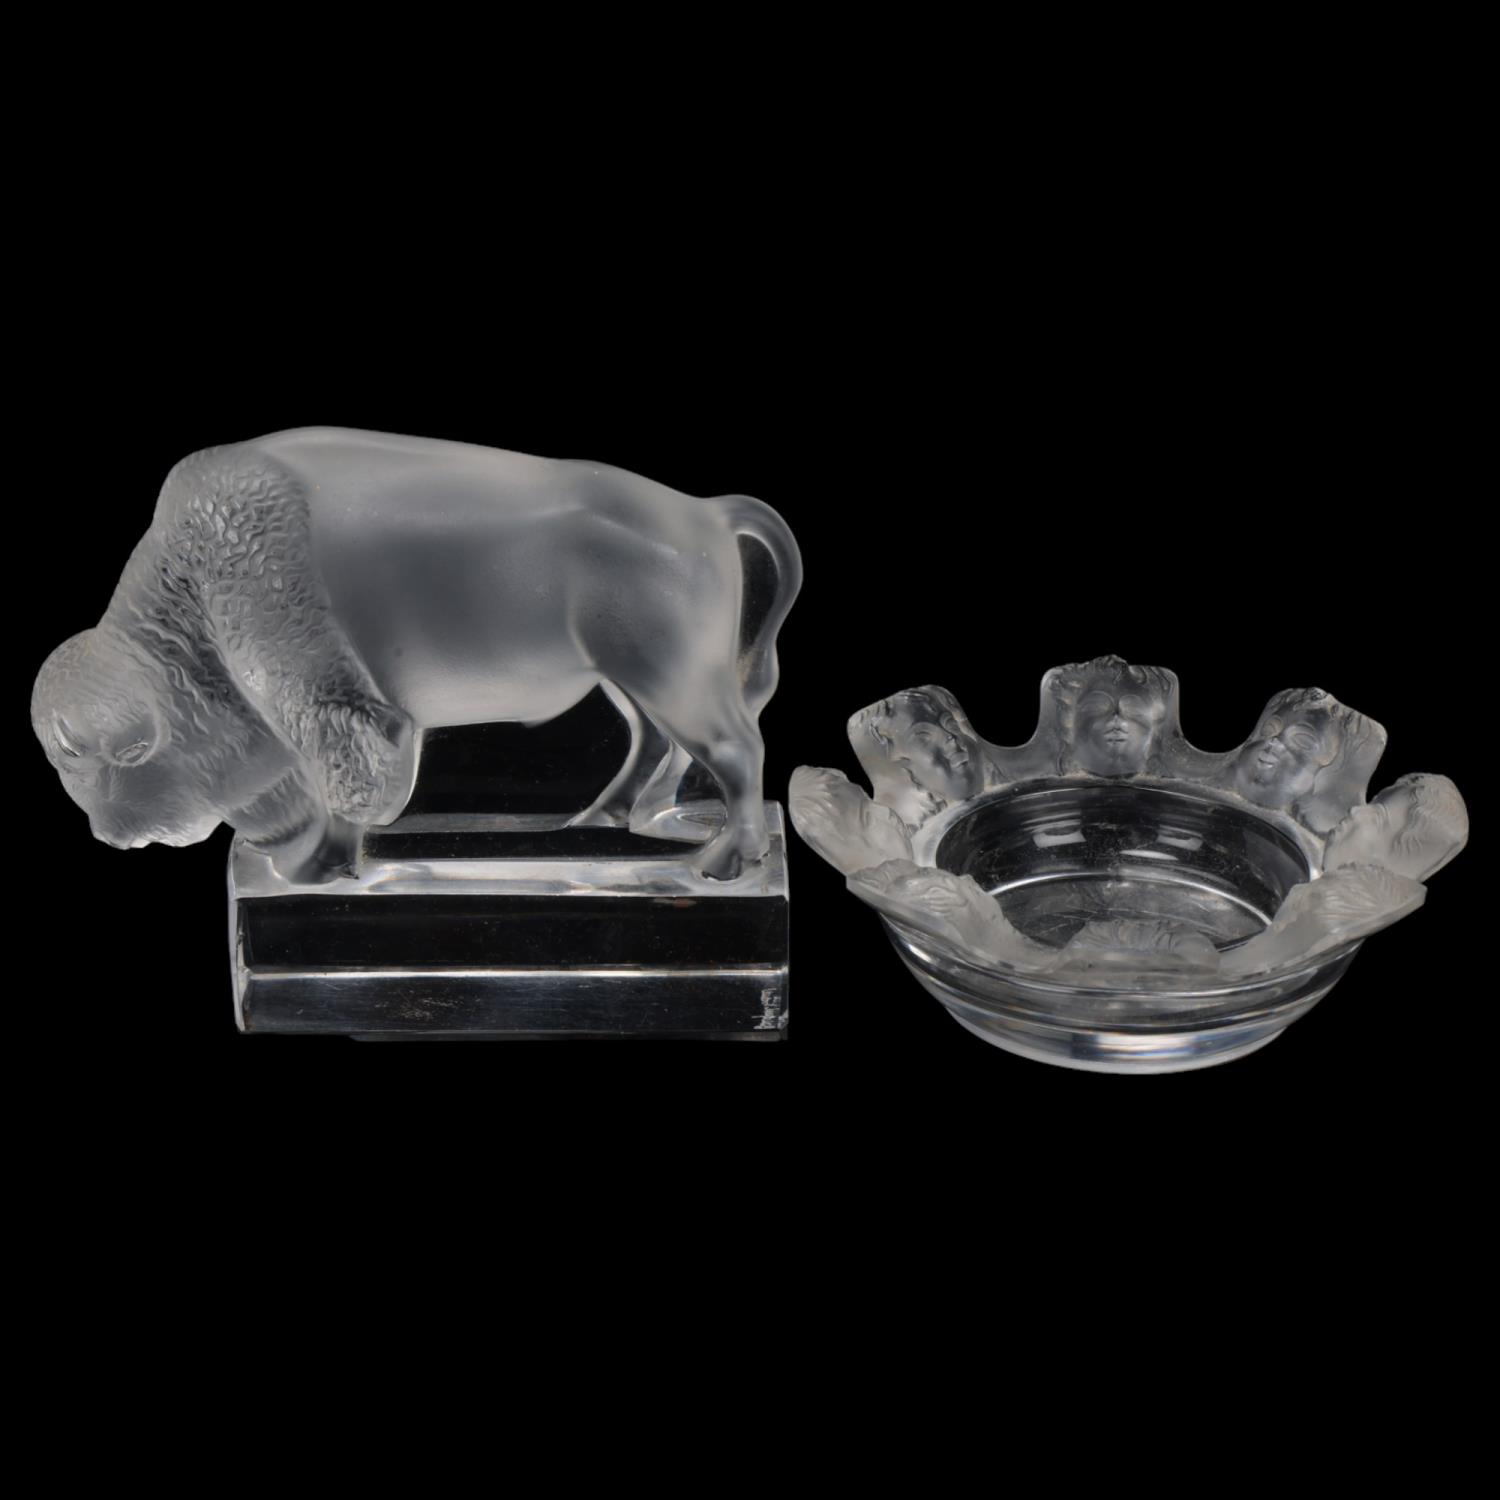 Rene Lalique, St Nicolas glass bowl with relief moulded surround, diameter 11cm, and a bison, length